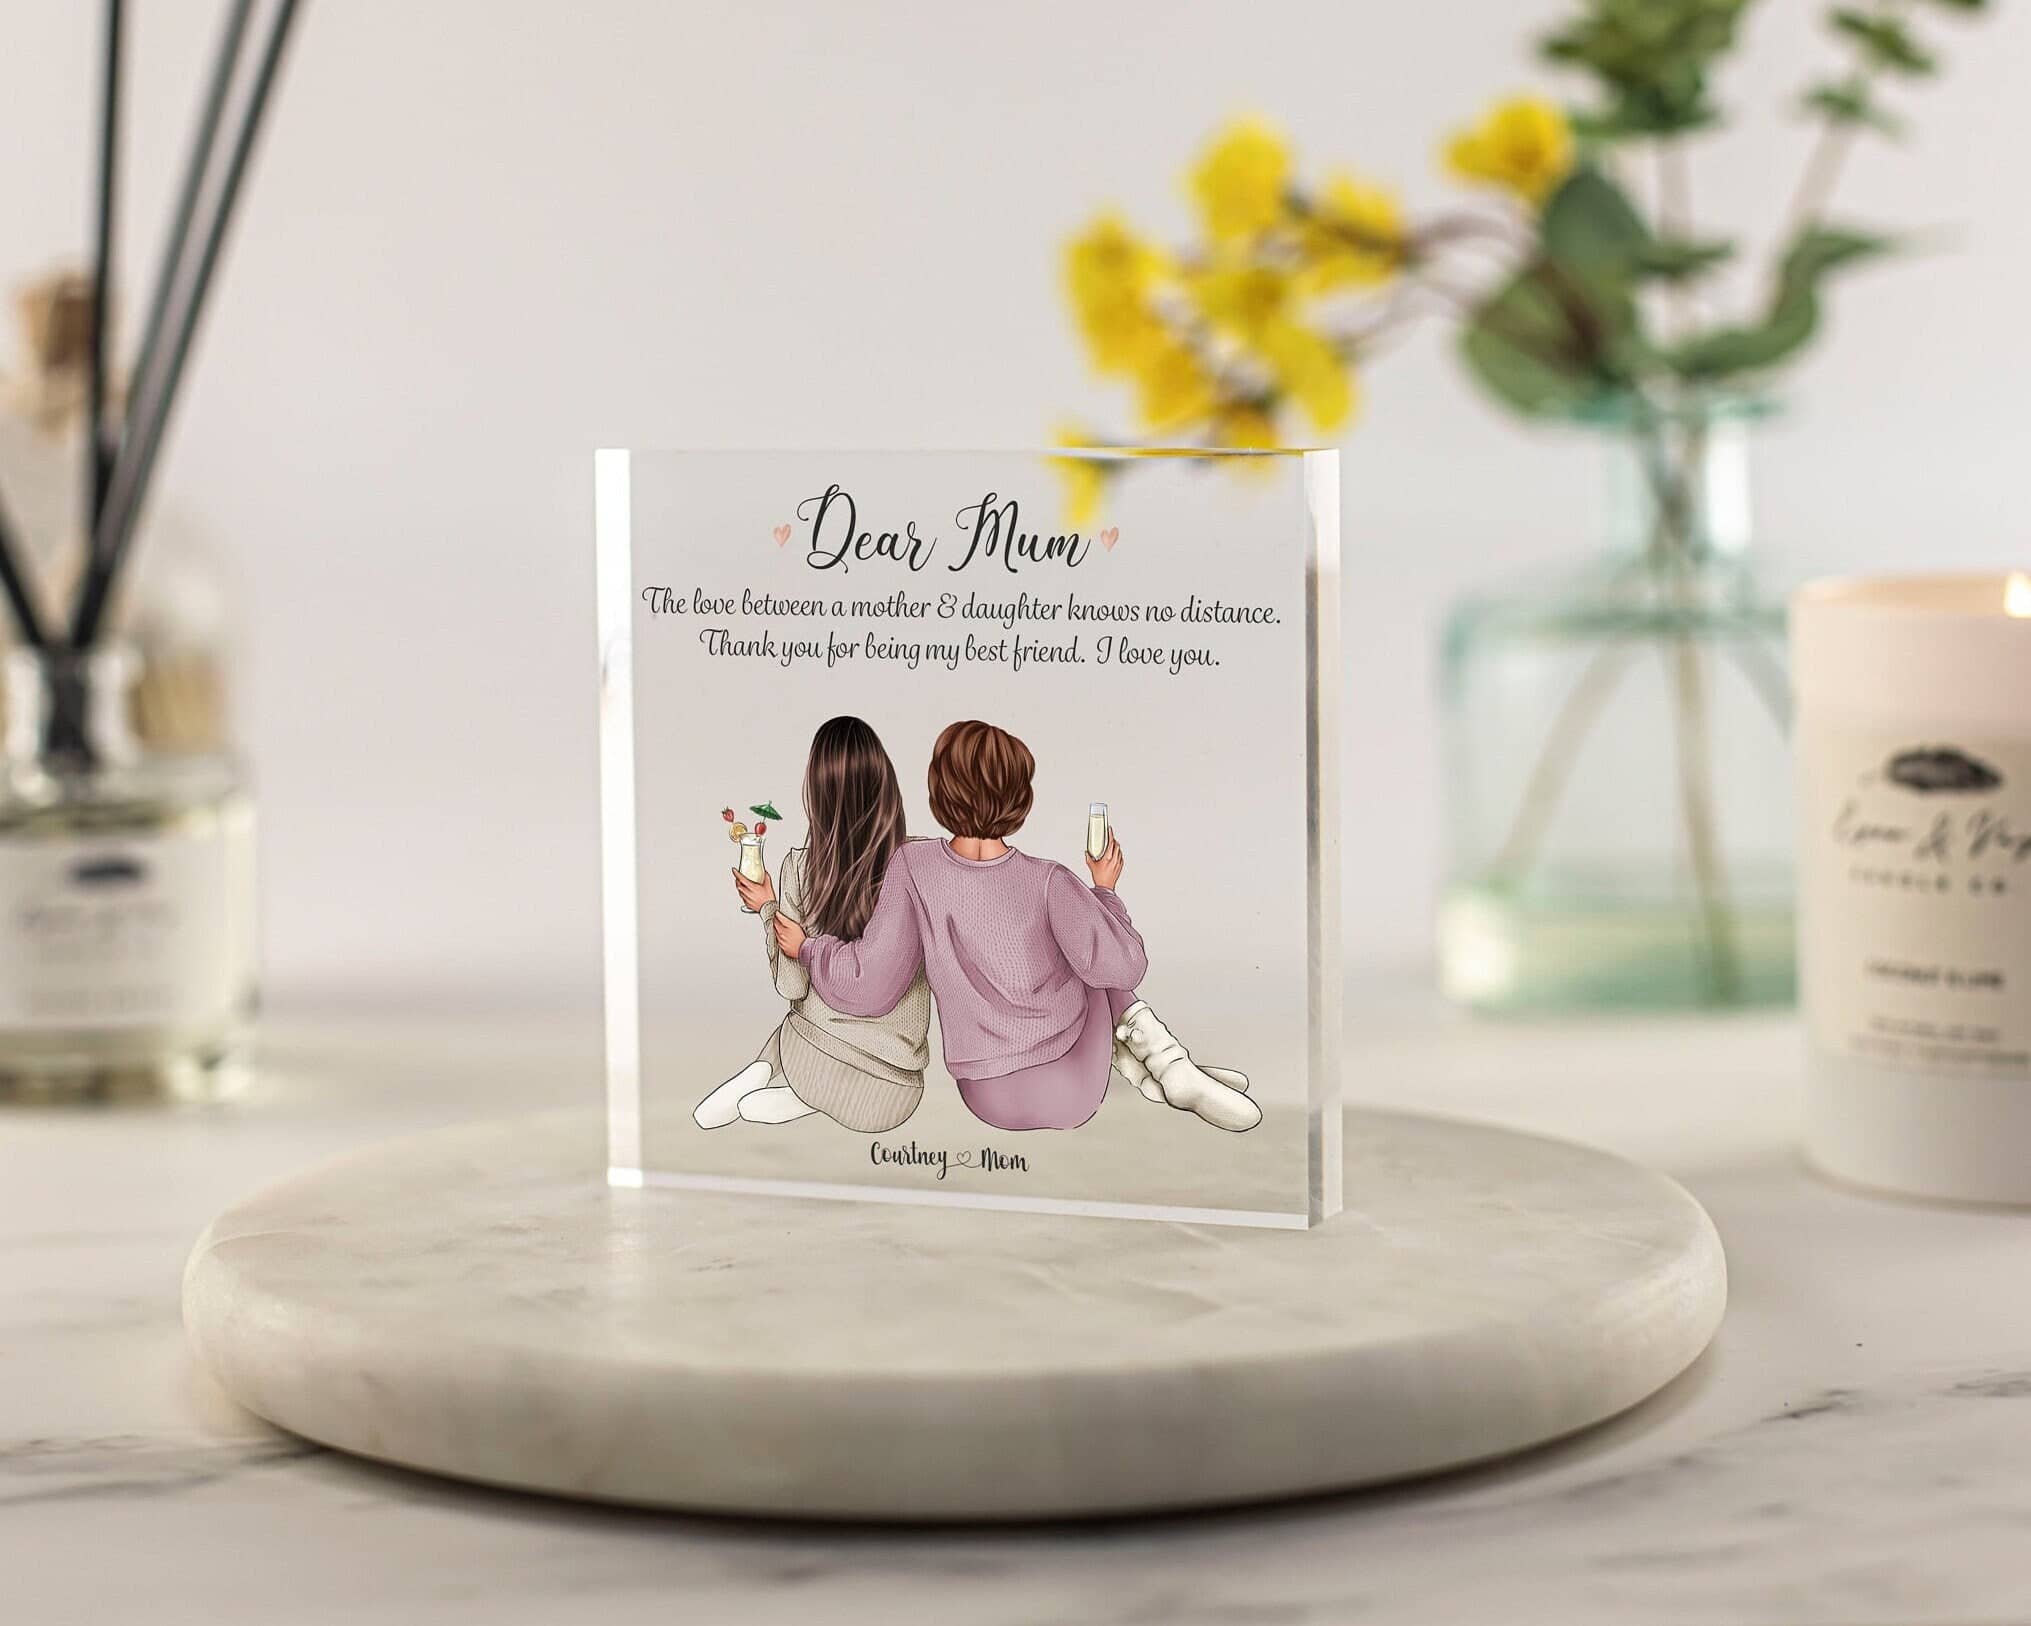 Personalised gift for mum for christmas, birthday, mothers day orjust to say I love you mum. A beautiful keepsake gift of mother and daughter illustration printed on acrylic block